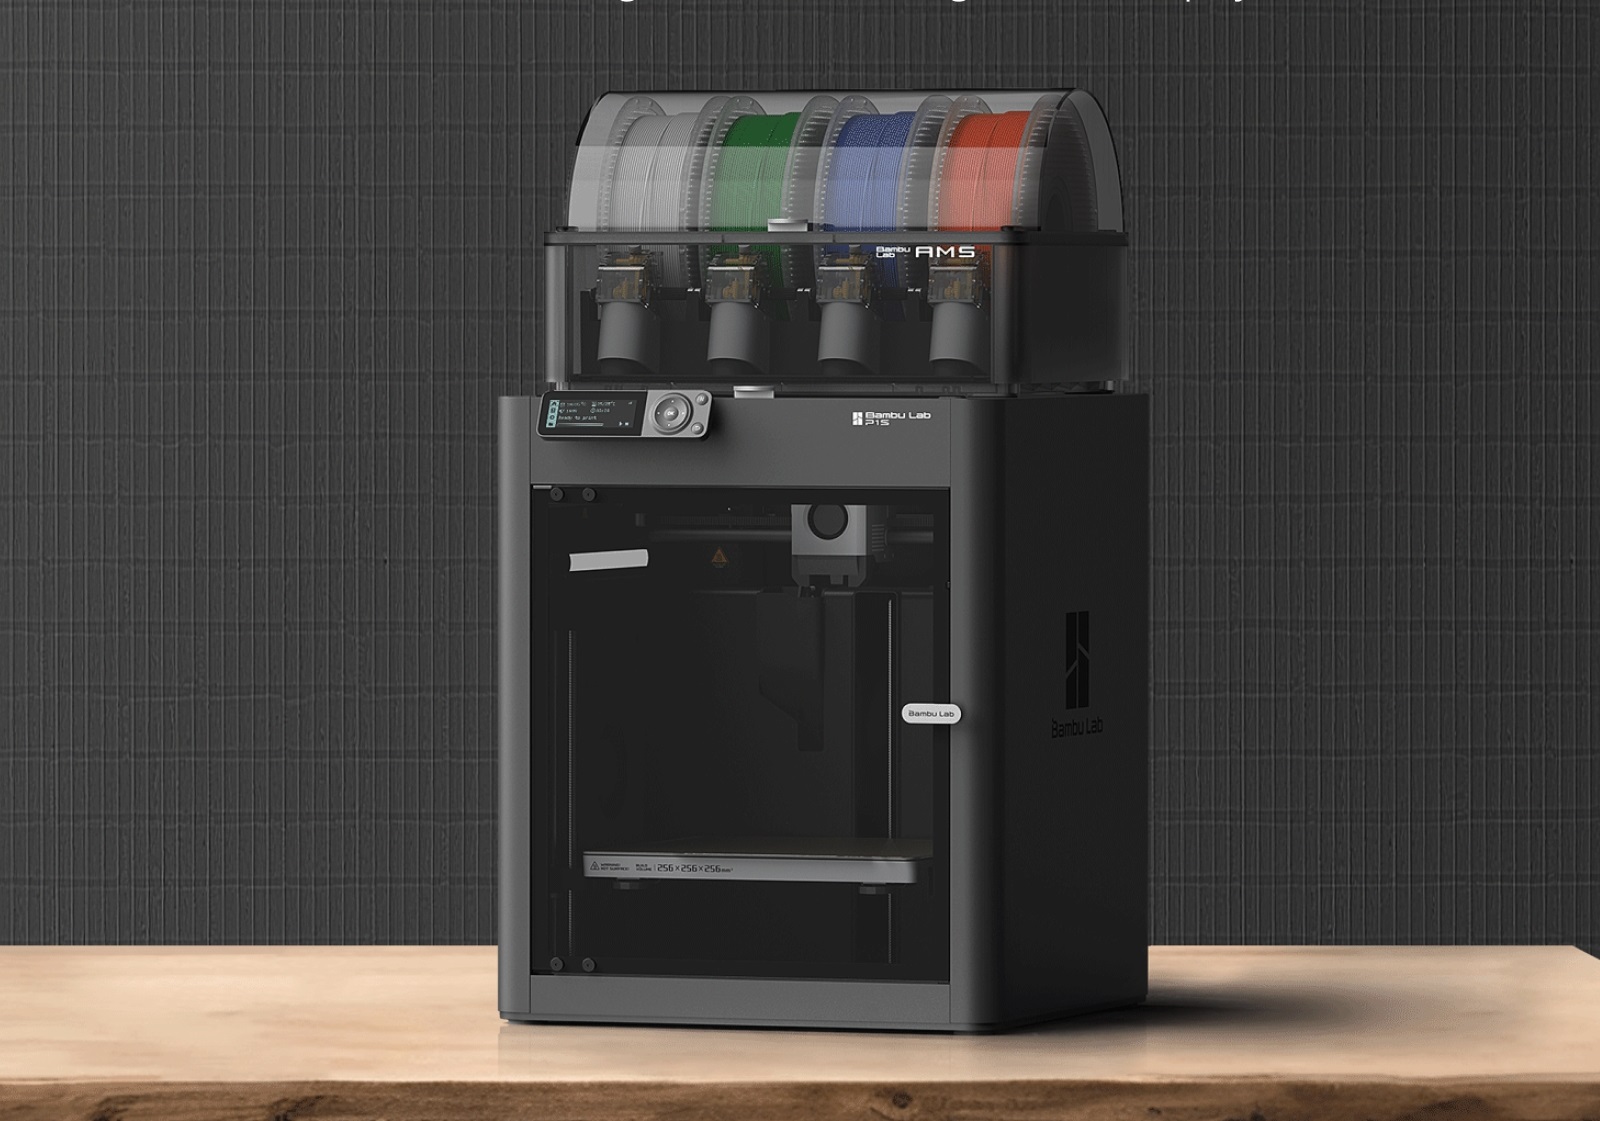 Bambu Lab delivers quieter 3D printing with new P1 series firmware